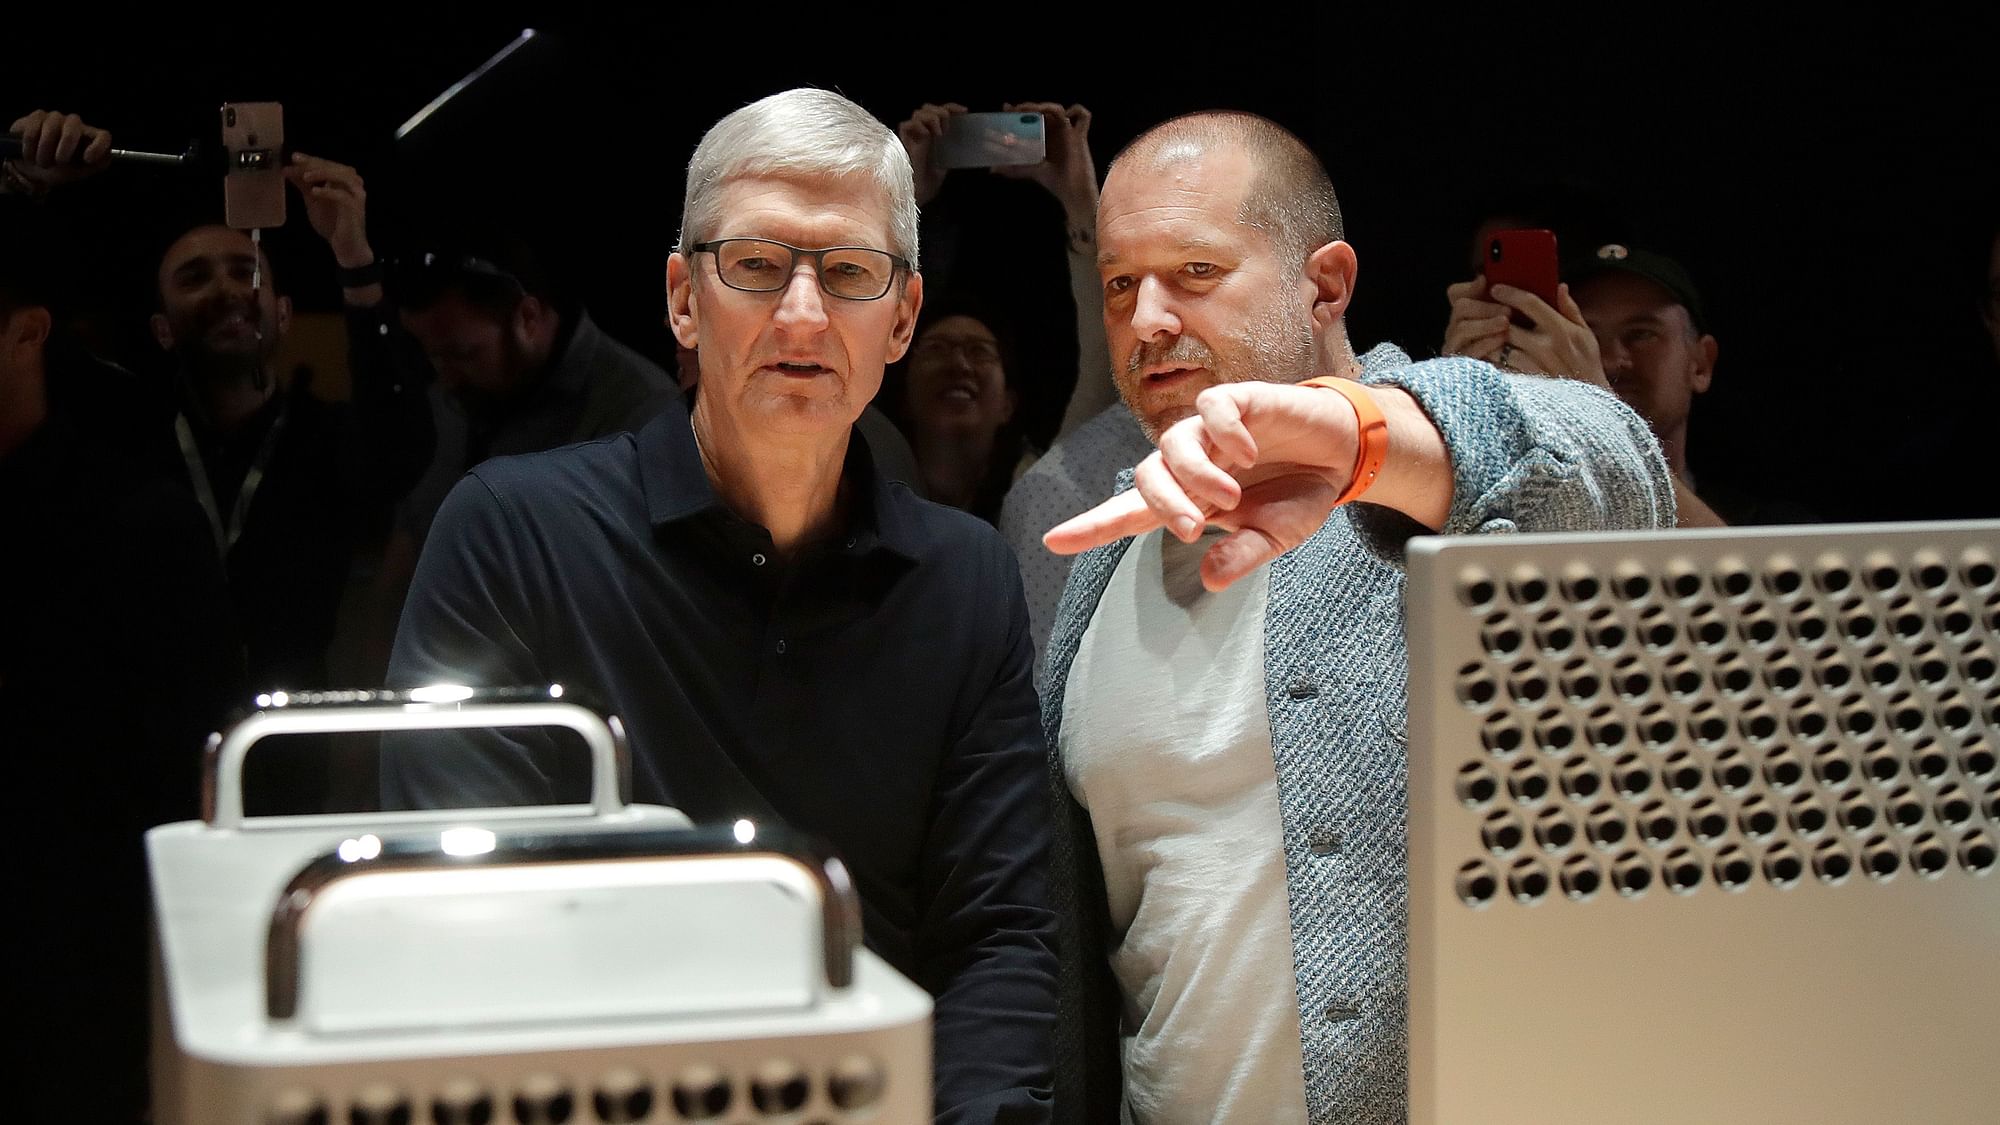 Jony Ive (right)with Apple CEO Tim Cook (left) at the WWDC 2019.